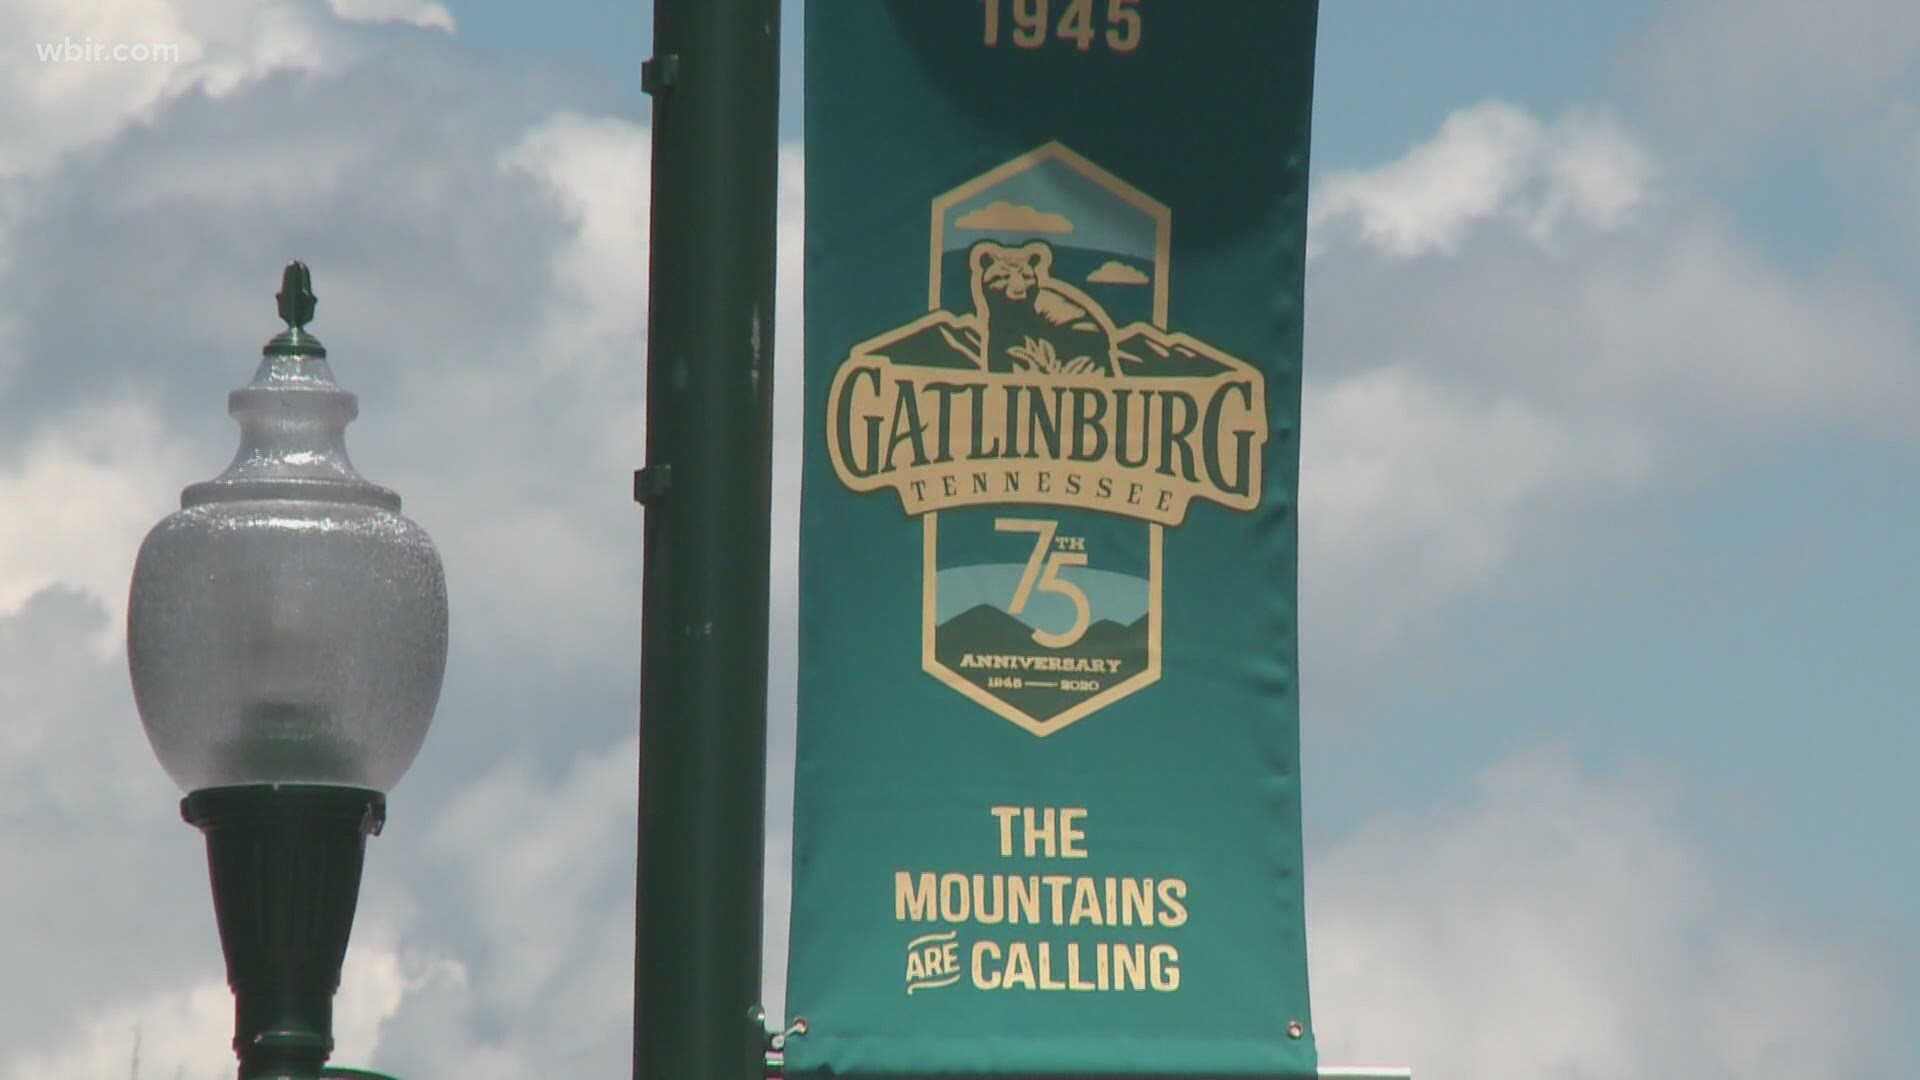 Packed streets, no social distancing, few masks and many other unsafe behaviors are common in the Gatlinburg area. The city can get even busier soon.